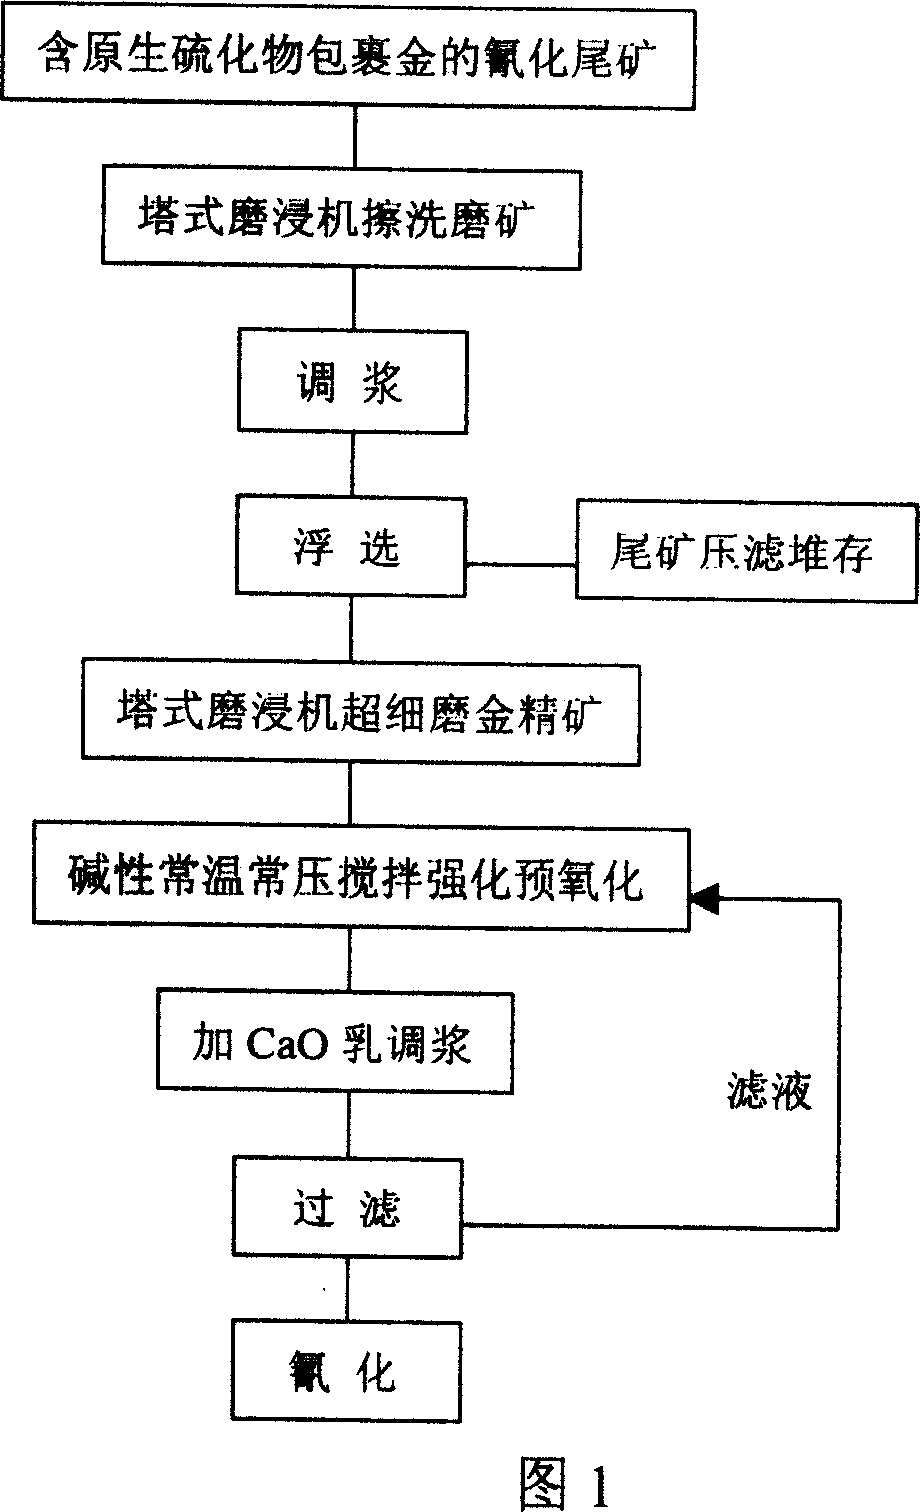 Gold-extraction process for tail-one cyanide containing gold wrapped by original sulfides